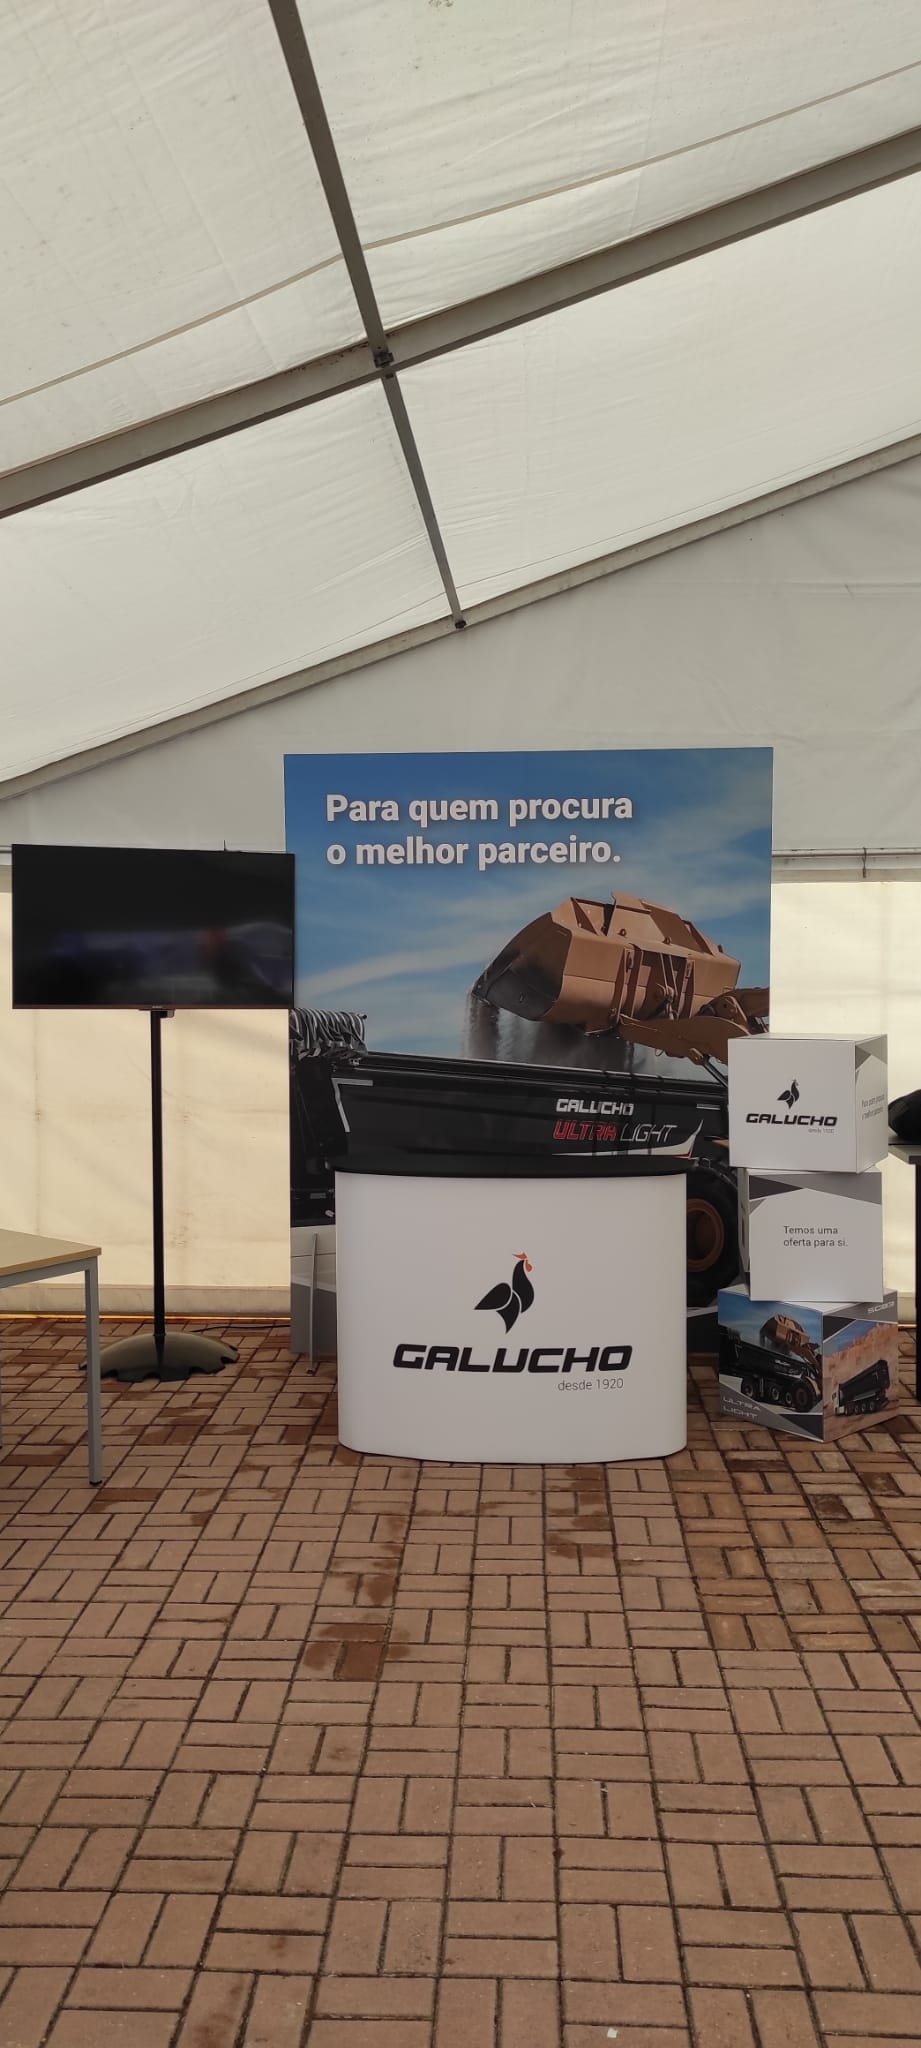 Galucho was present at Ford Trucks Event